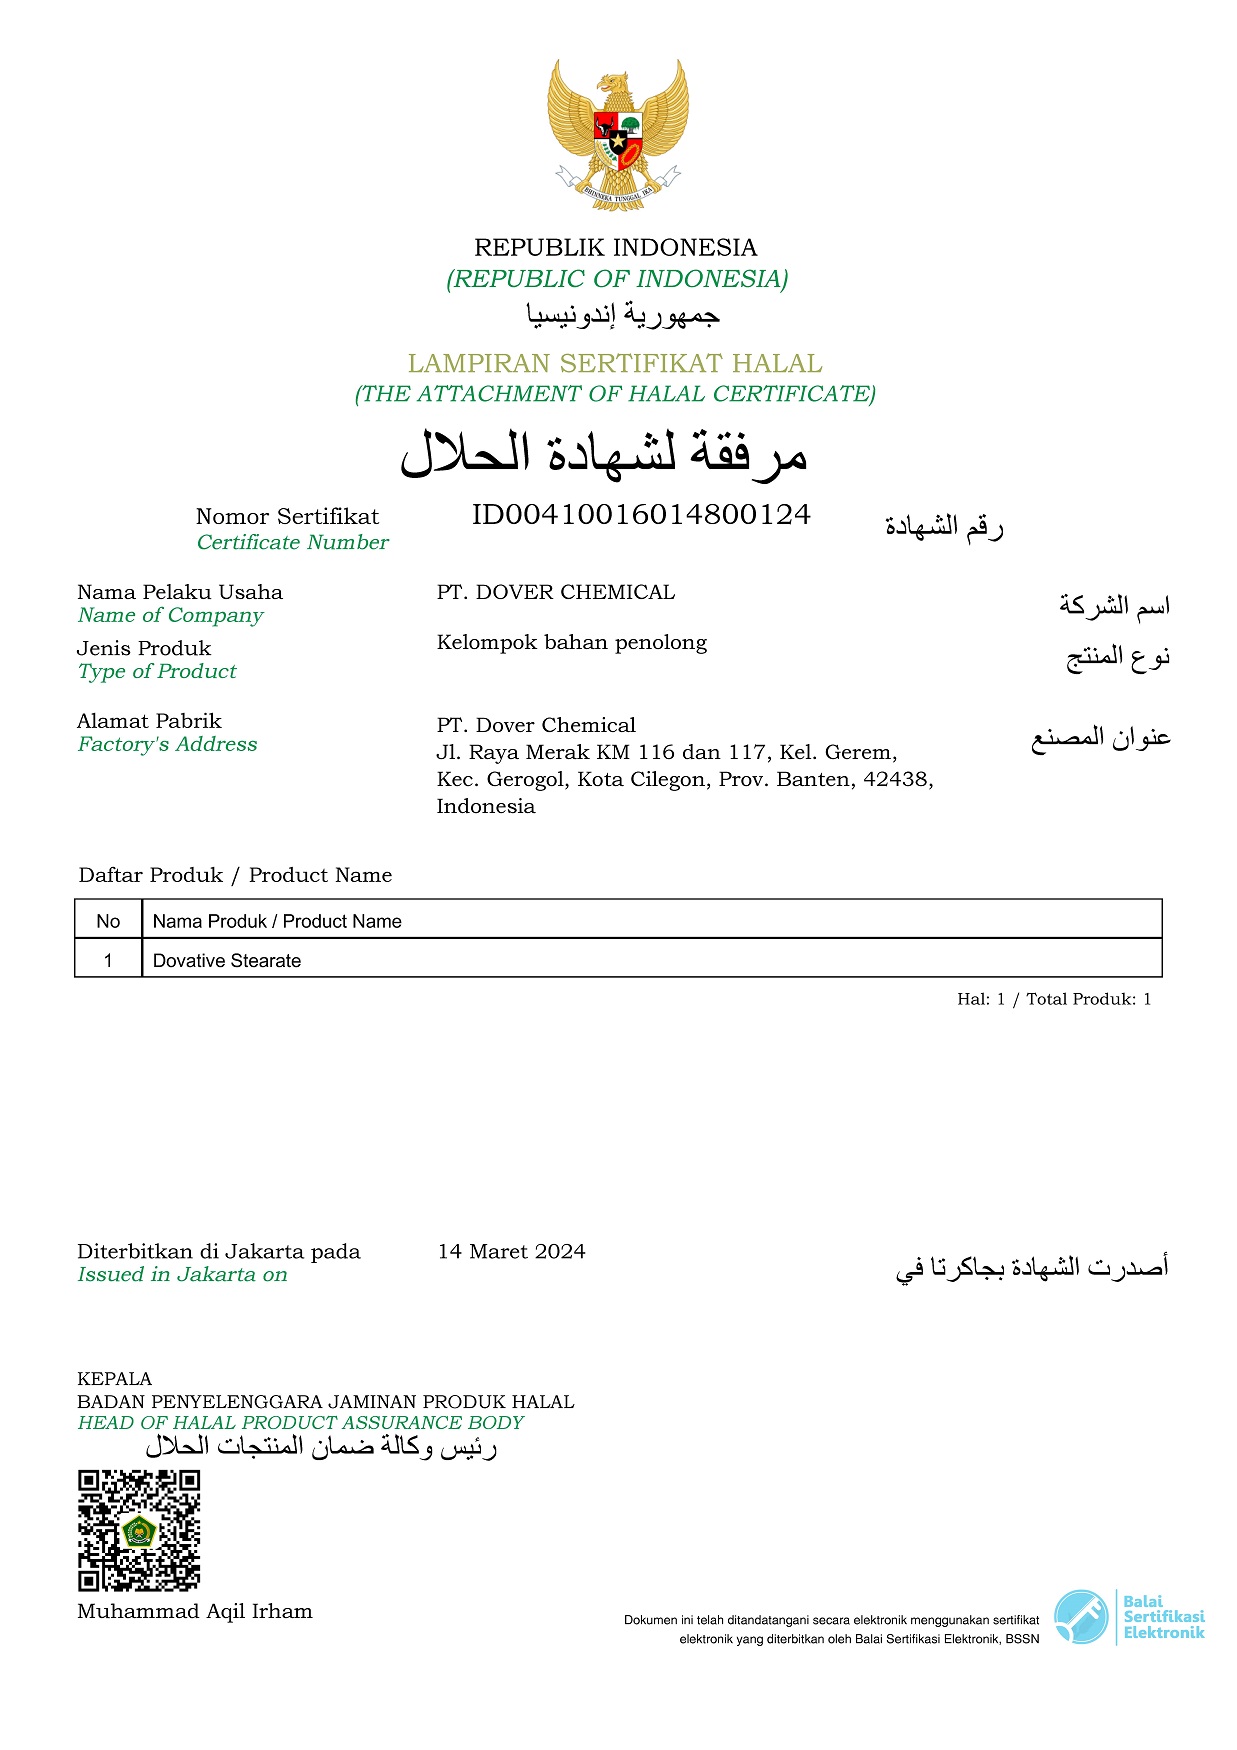 Halal Certificate for Auxiliary Ingredient Group - Dovative Stearate